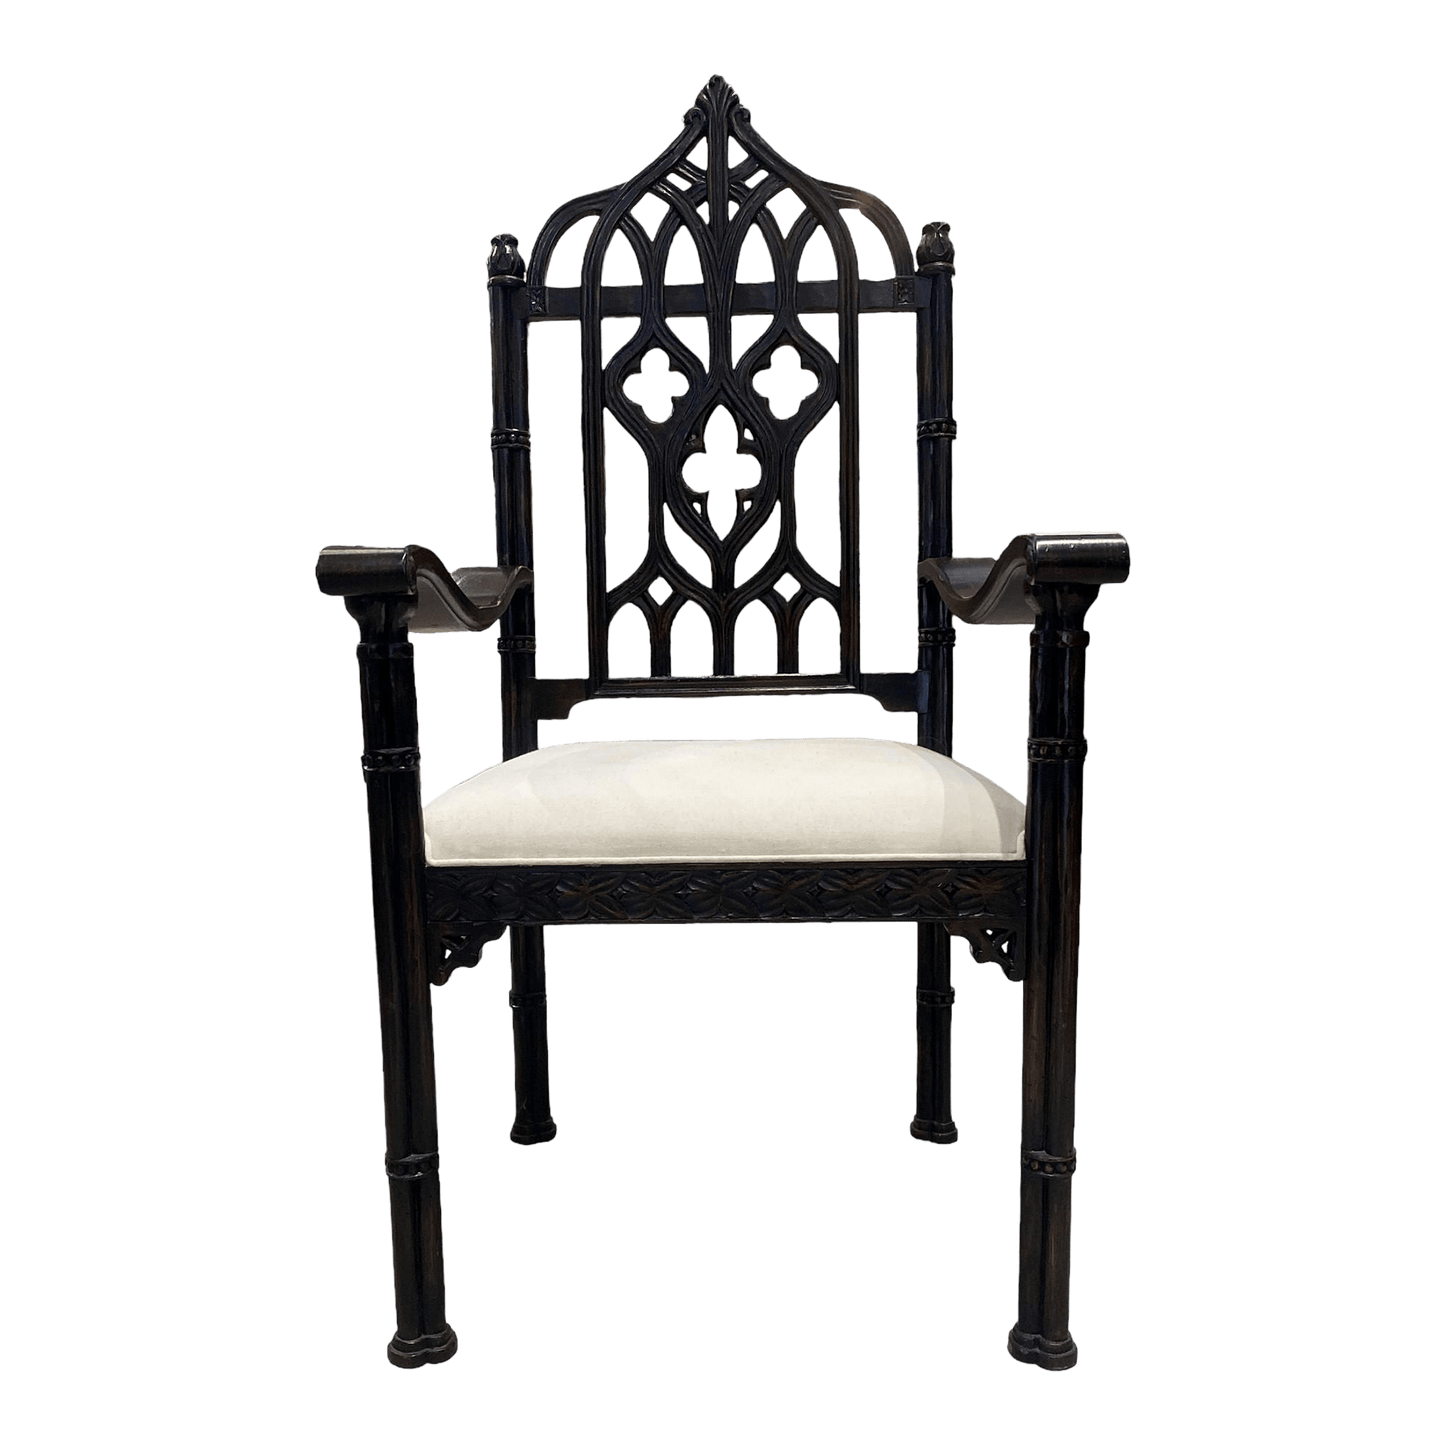 Contemporary Gothic Walnut Hand Carved Arm Chair - The White Barn Antiques